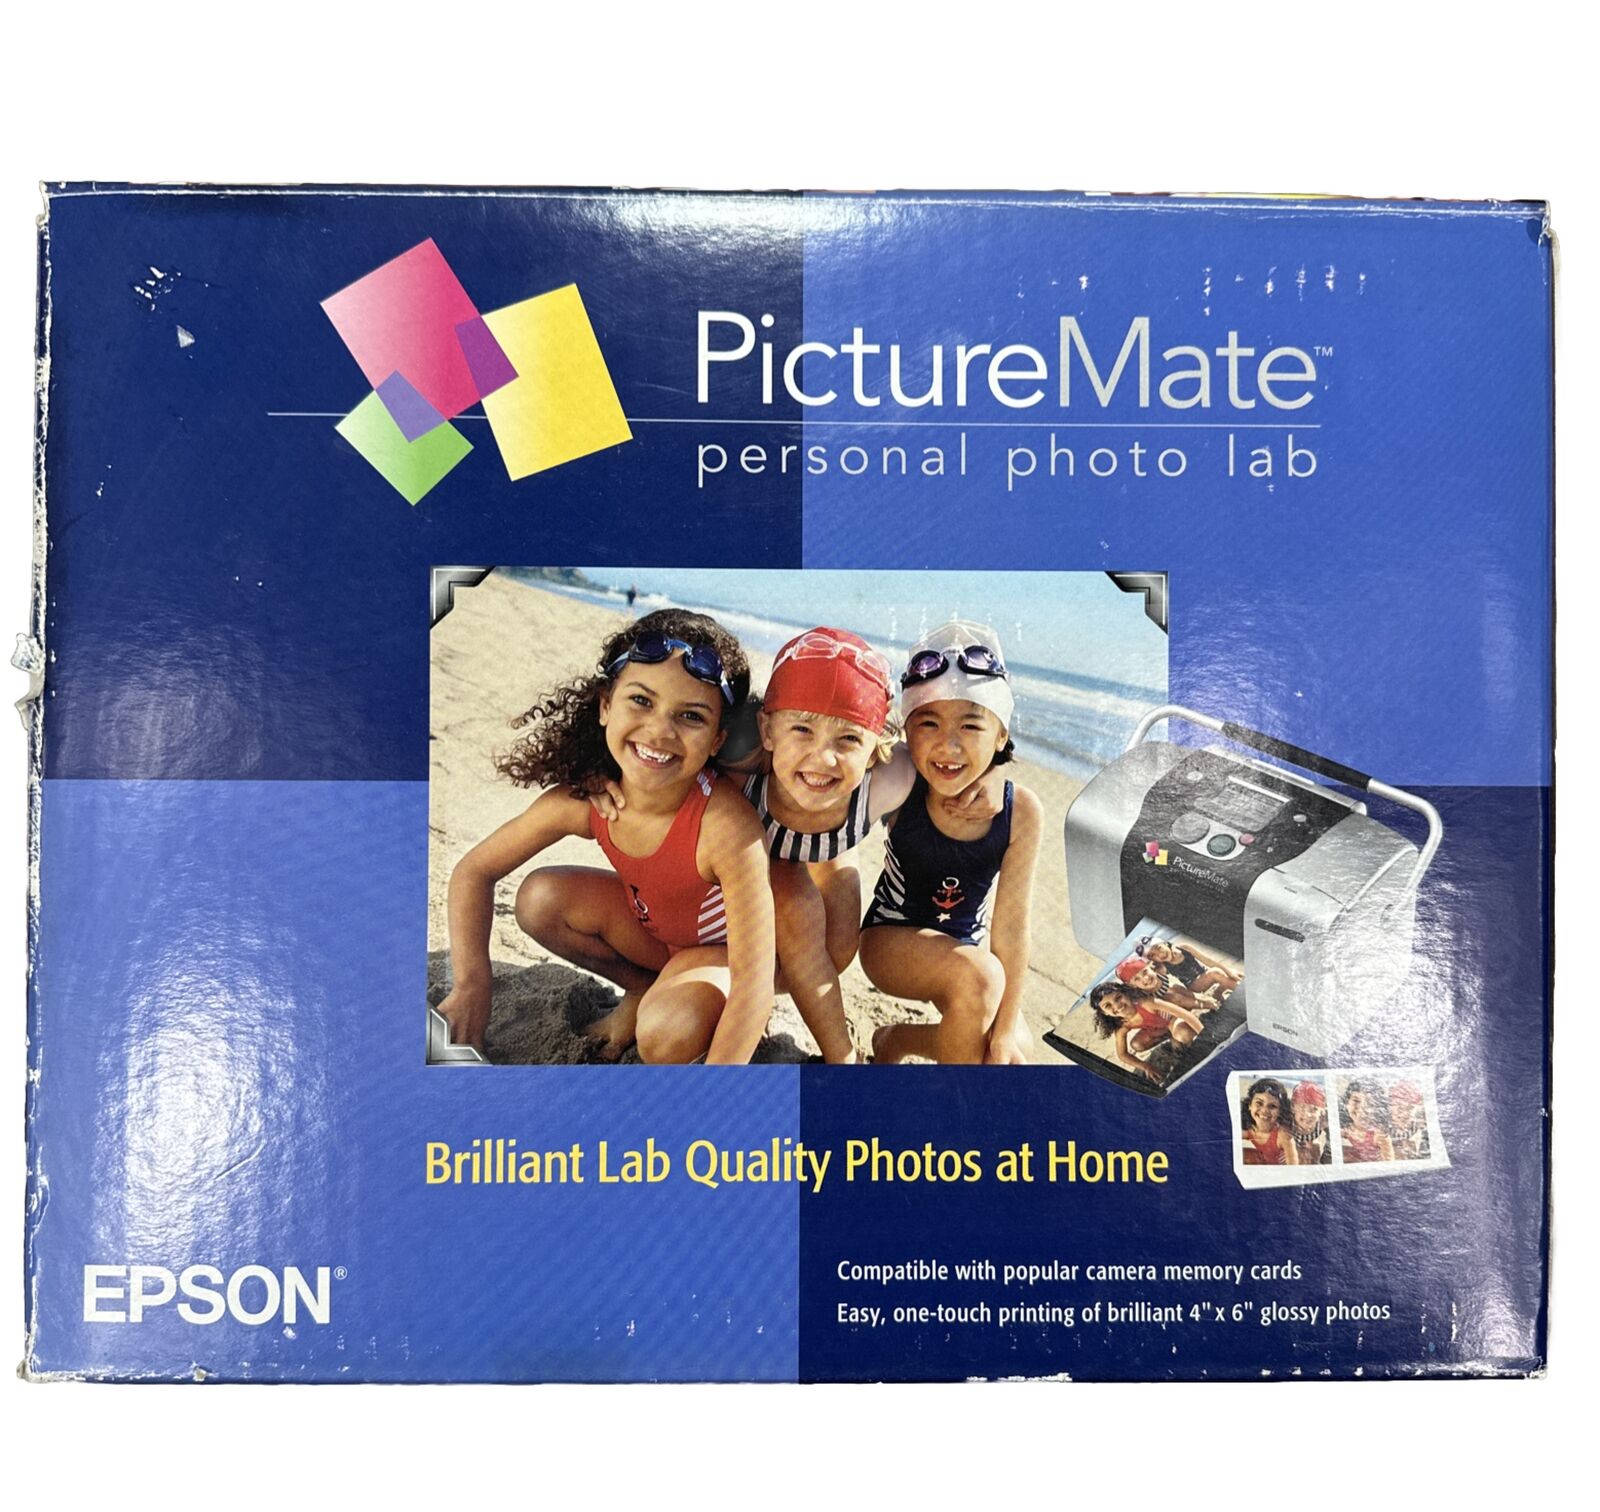 NEW Epson PictureMate Express Edition Personal Photo Lab Printer Model B271A